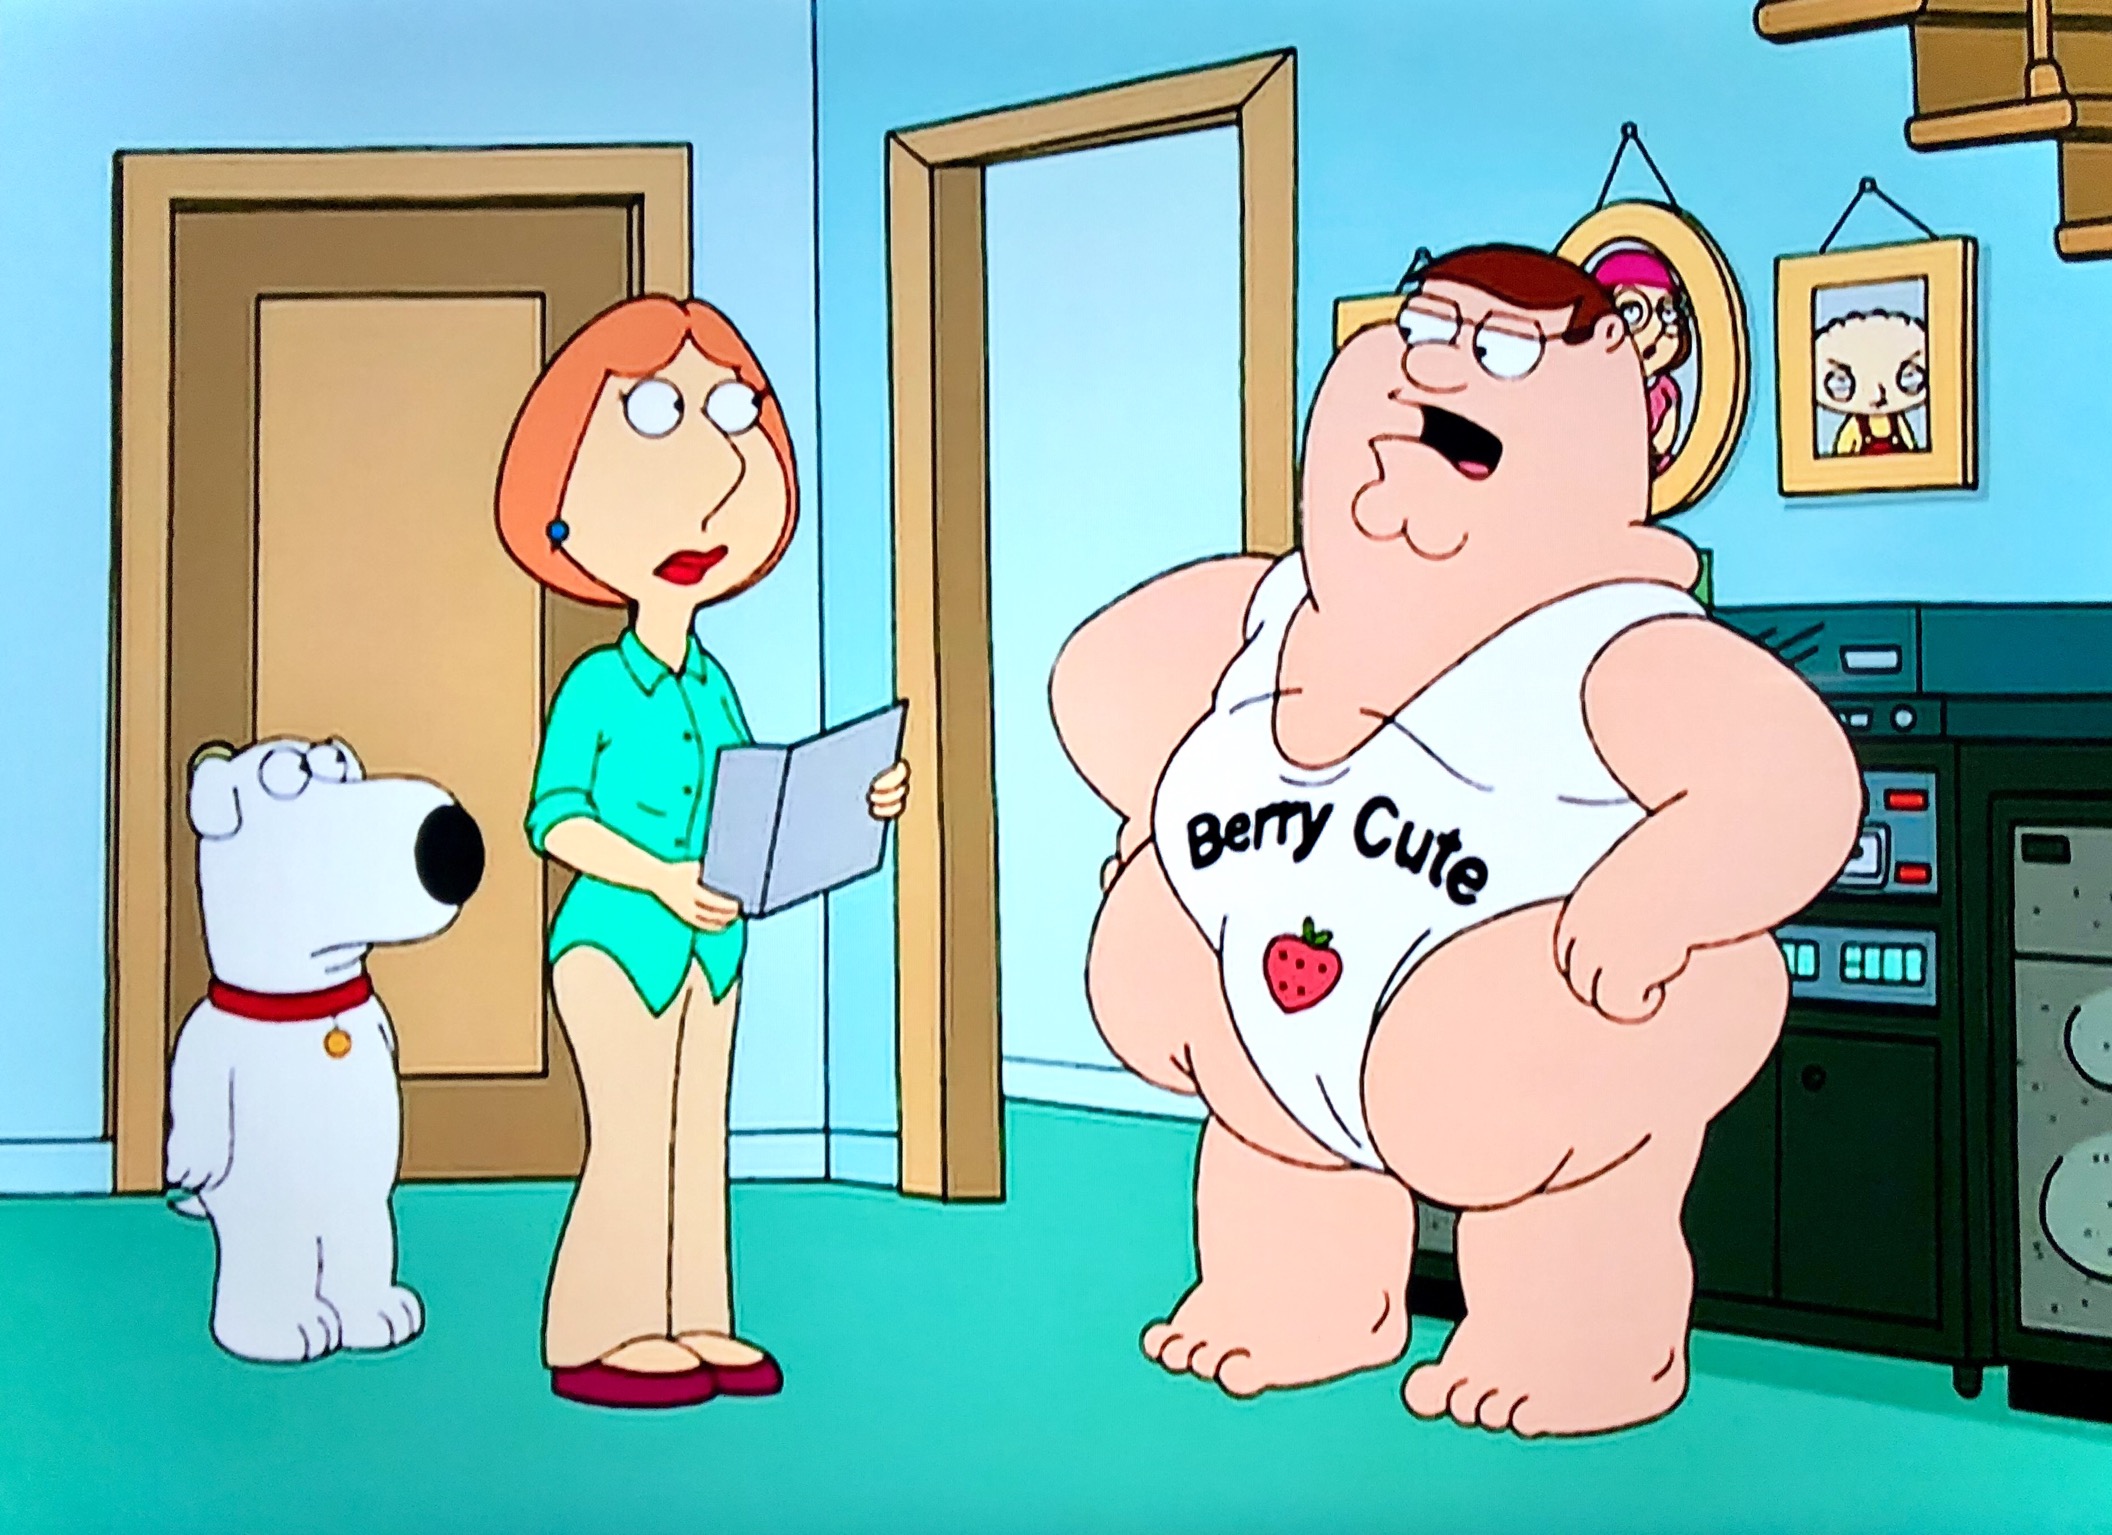 Make your own. aka: Peter Griffin, Family Guy. 